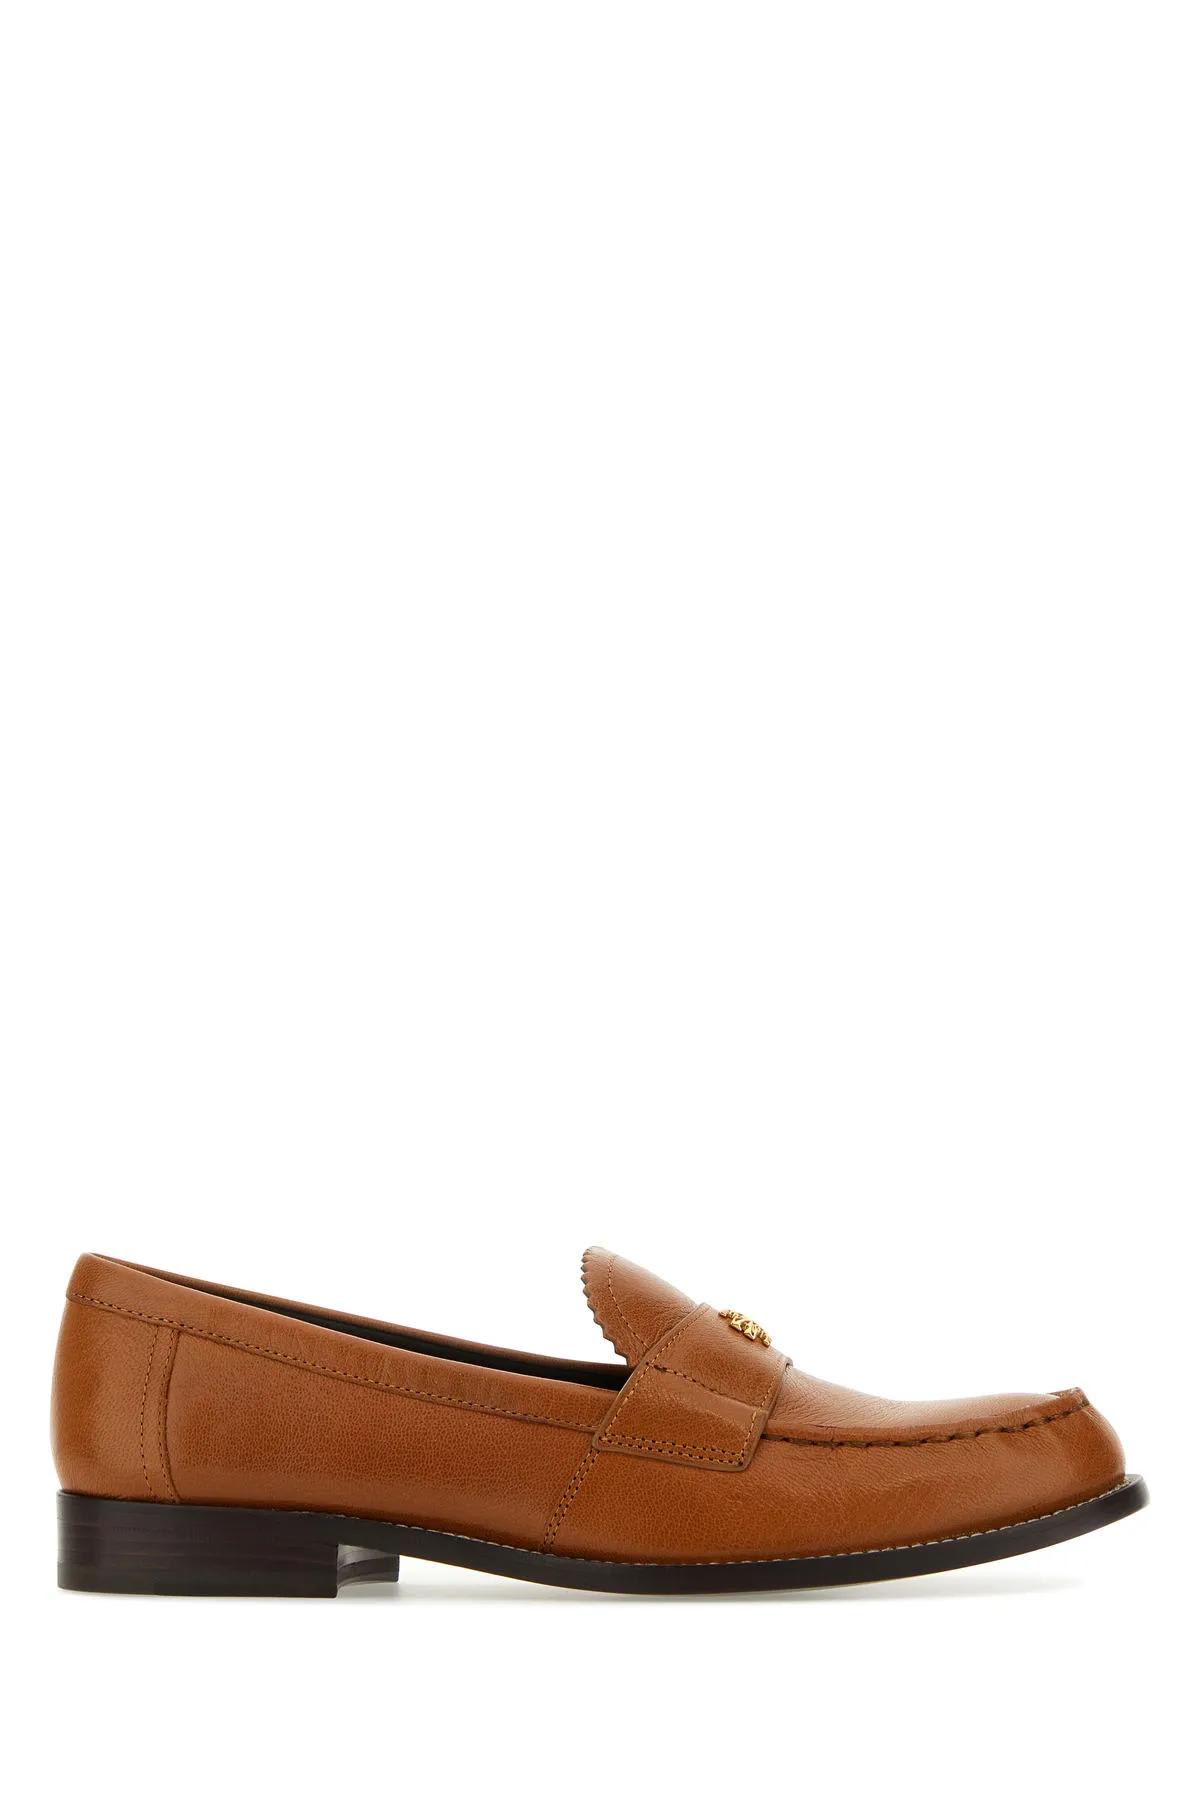 TORY BURCH CAMEL LEATHER LOAFERS